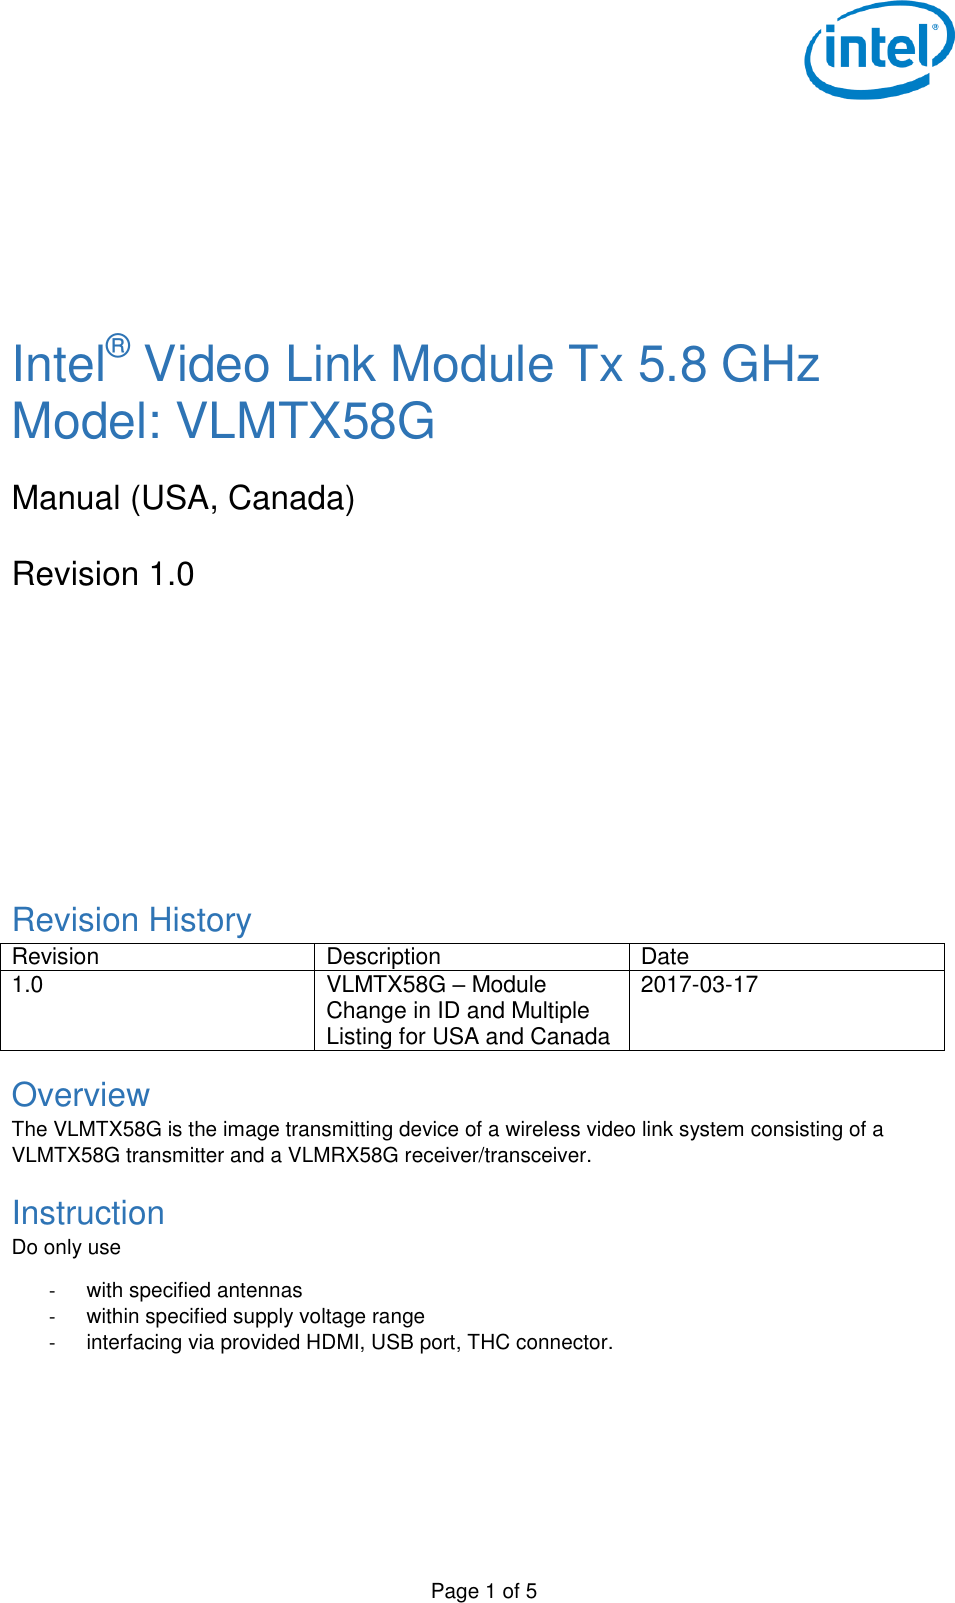  Page 1 of 5        Intel® Video Link Module Tx 5.8 GHz Model: VLMTX58G  Manual (USA, Canada)  Revision 1.0        Revision History Revision Description Date 1.0 VLMTX58G – Module Change in ID and Multiple Listing for USA and Canada 2017-03-17 Overview The VLMTX58G is the image transmitting device of a wireless video link system consisting of a VLMTX58G transmitter and a VLMRX58G receiver/transceiver. Instruction Do only use  -  with specified antennas -  within specified supply voltage range -  interfacing via provided HDMI, USB port, THC connector.   